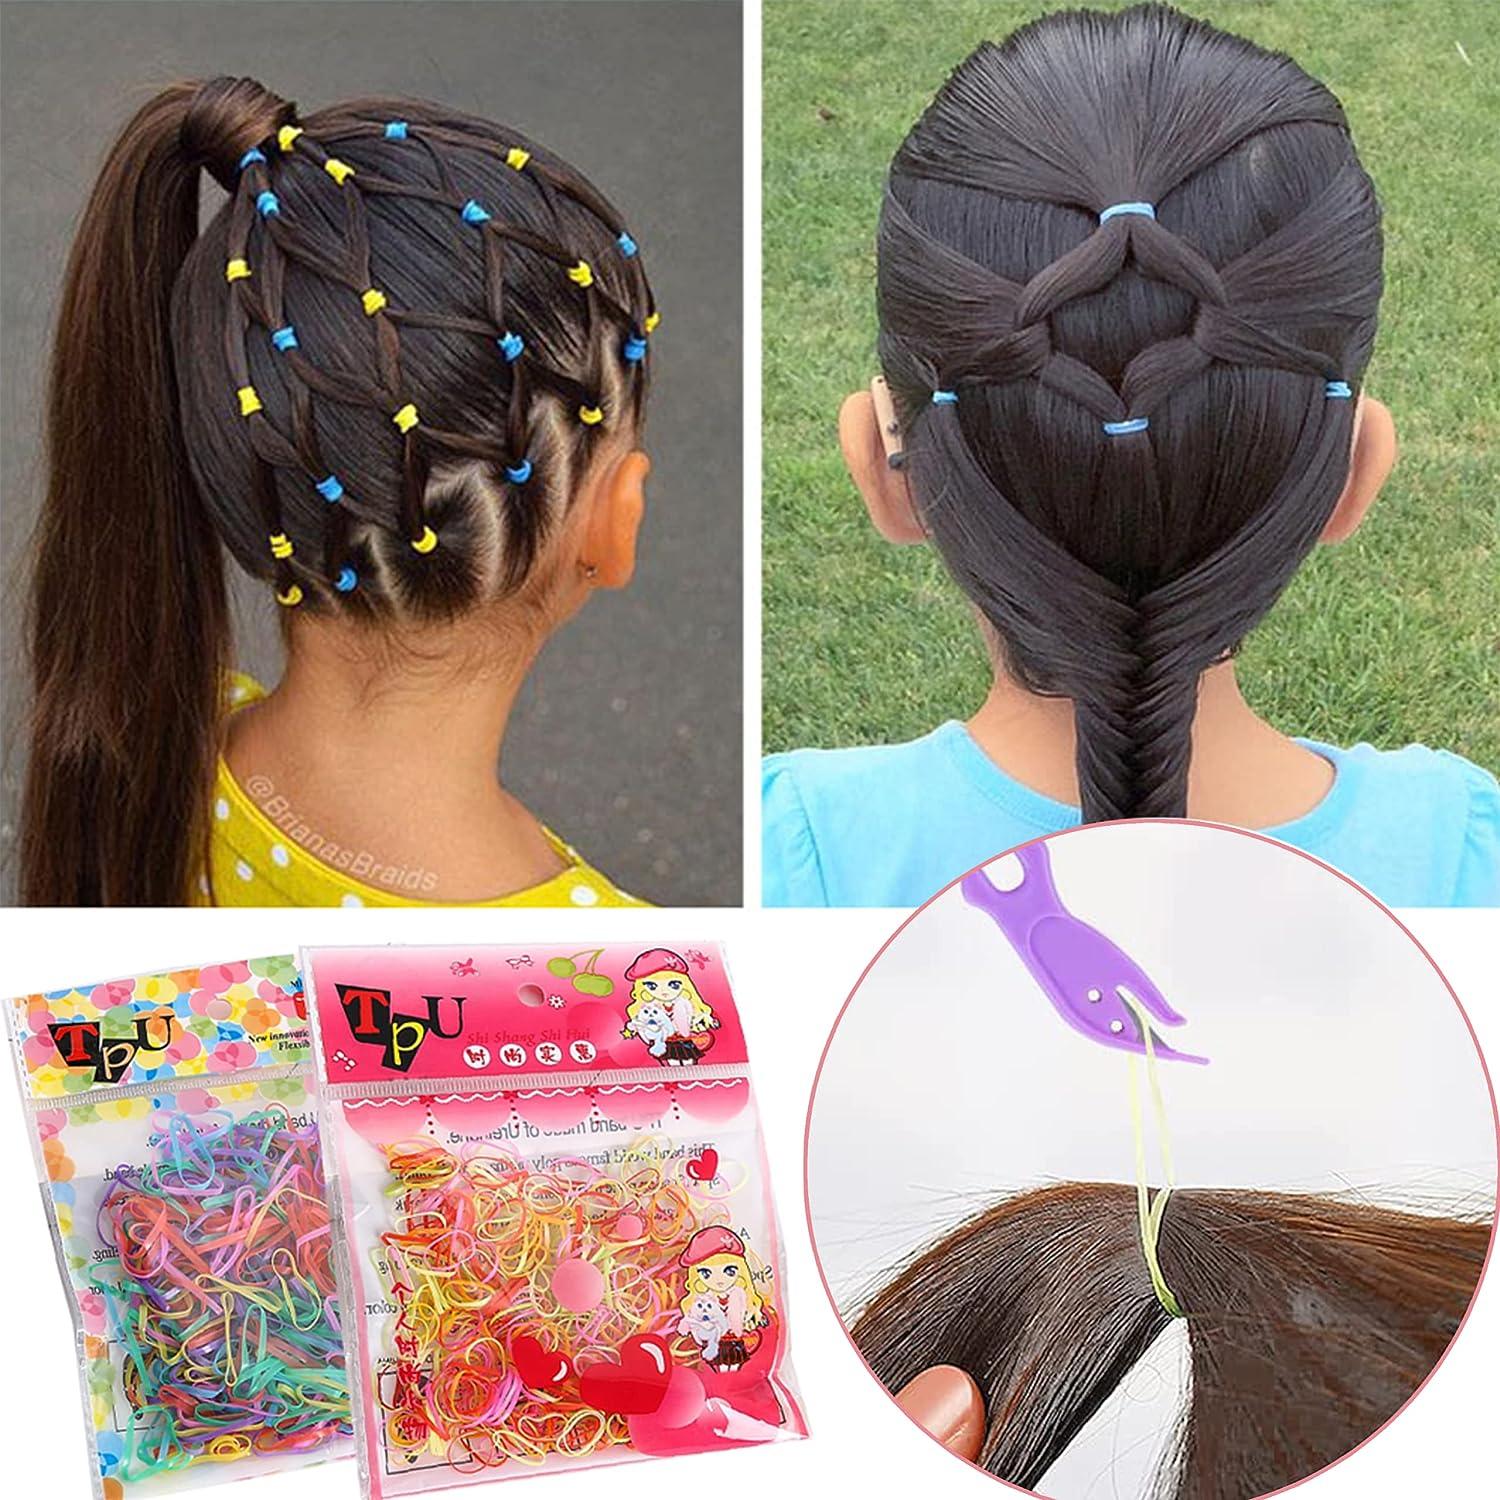 760Pcs Color Elastic Hair Ties 2Pcs Rubber Hair Band Remover Cutter 8pcs Topsy  Hair Tail Tools Hair Loop Styling Tool for Toddlers Girls Women(Hair Rubber  Bands Have 260 Large Loops and 500